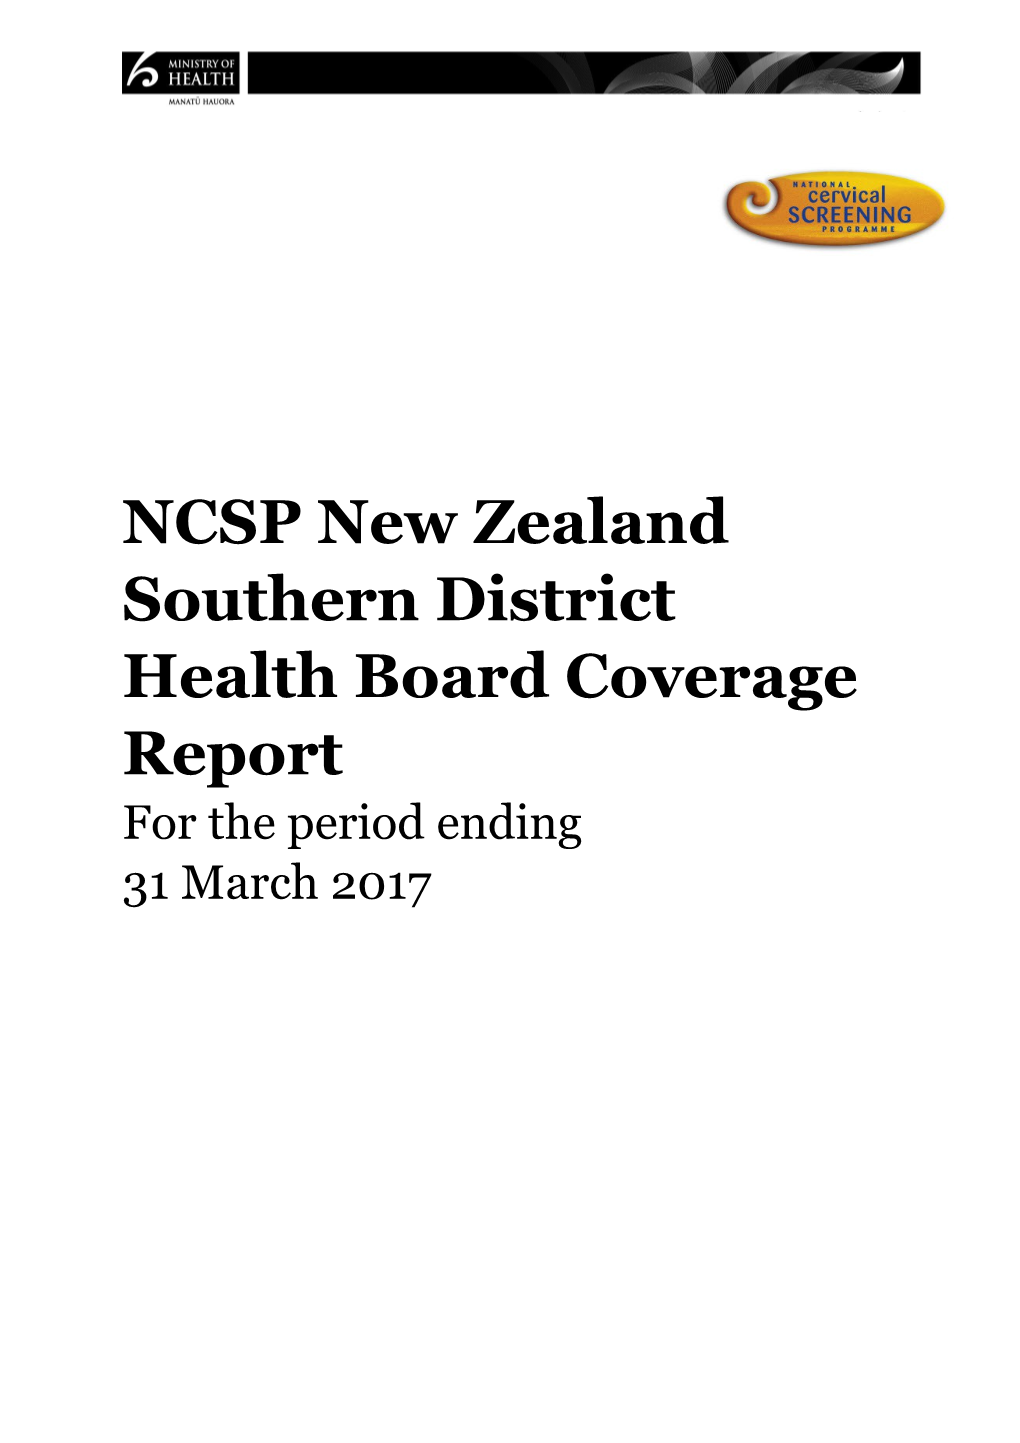 NCSP New Zealand Southern District Health Boardcoverage Report